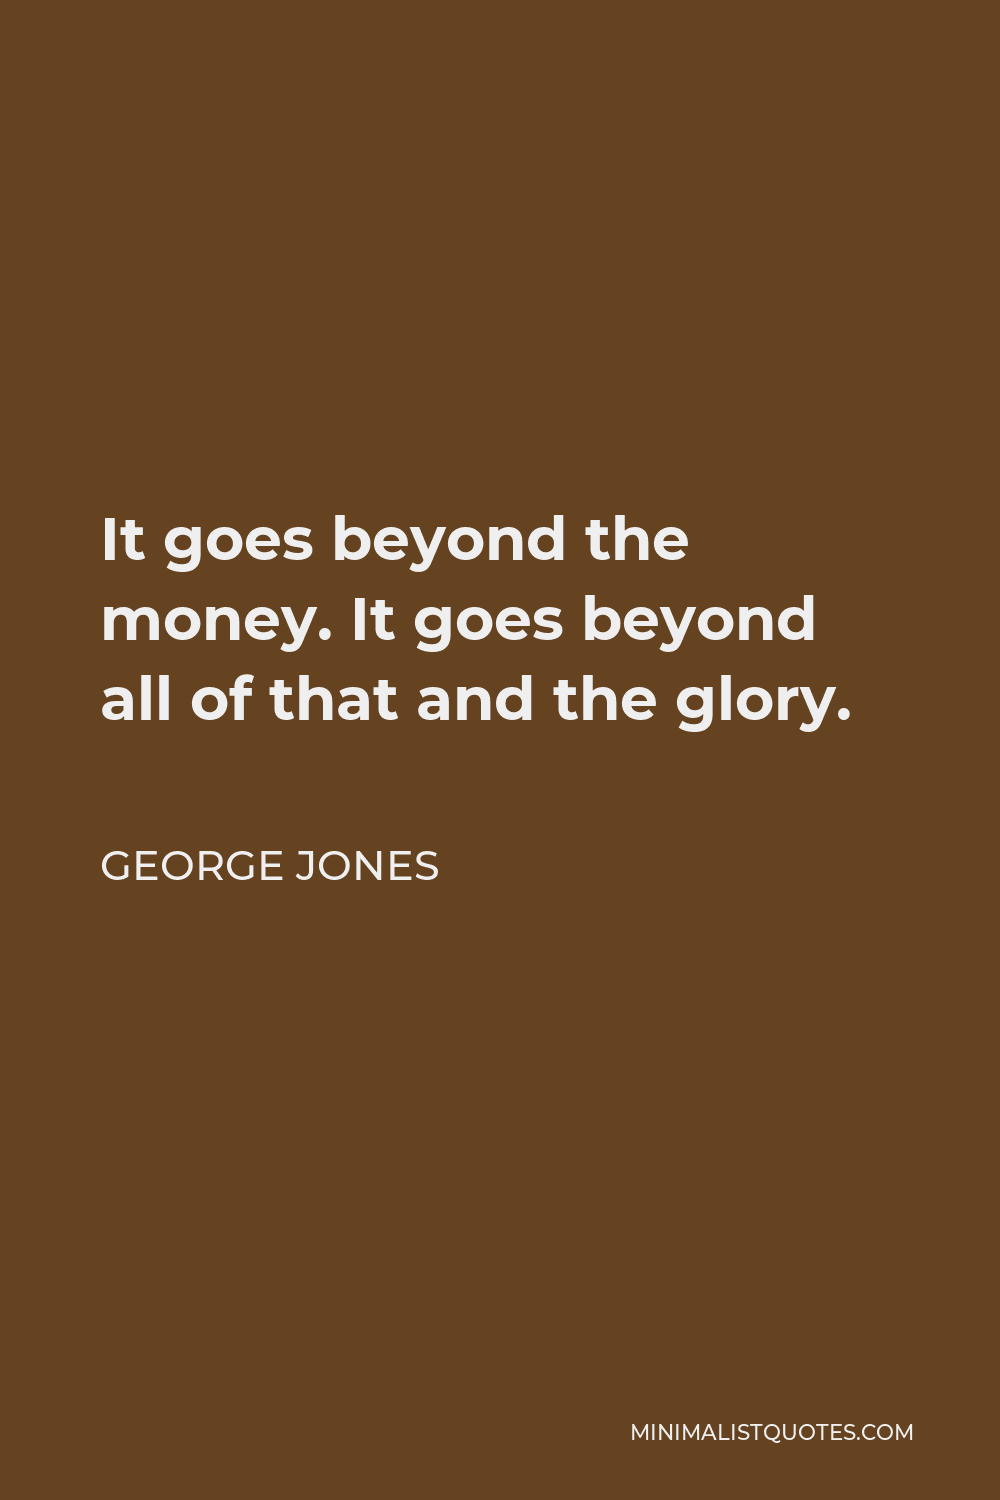 George Jones Quote - It goes beyond the money. It goes beyond all of that and the glory.